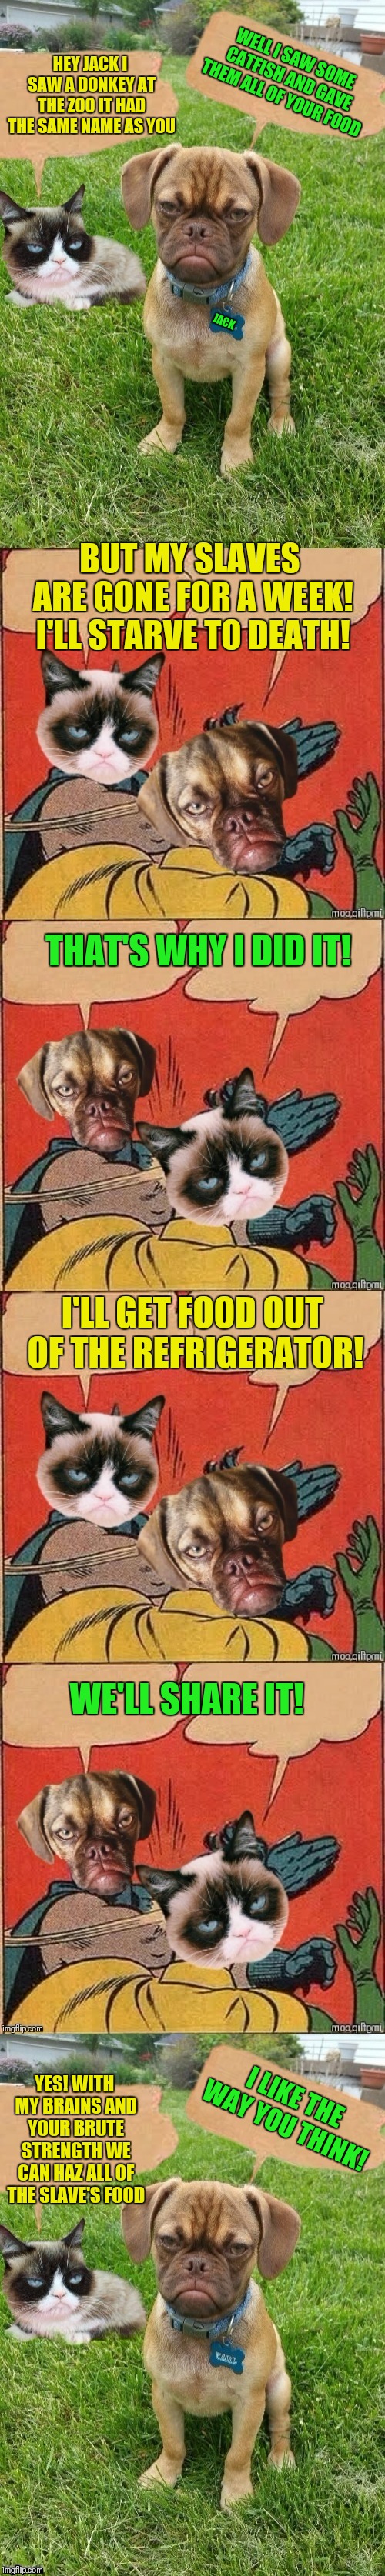 44colt's Meme Template Challenge March 18-24 (A 44colt event) Follow the link in the comments below for templates☺ | HEY JACK I SAW A DONKEY AT THE ZOO IT HAD THE SAME NAME AS YOU; WELL I SAW SOME CATFISH AND GAVE THEM ALL OF YOUR FOOD; JACK; BUT MY SLAVES ARE GONE FOR A WEEK! I'LL STARVE TO DEATH! THAT'S WHY I DID IT! I'LL GET FOOD OUT OF THE REFRIGERATOR! WE'LL SHARE IT! YES! WITH MY BRAINS AND YOUR BRUTE STRENGTH WE CAN HAZ ALL OF THE SLAVE'S FOOD; I LIKE THE WAY YOU THINK! | image tagged in battle of the grumps,44colt's meme challenge,memes,grumpy cat,batman slapping robin,44colt | made w/ Imgflip meme maker